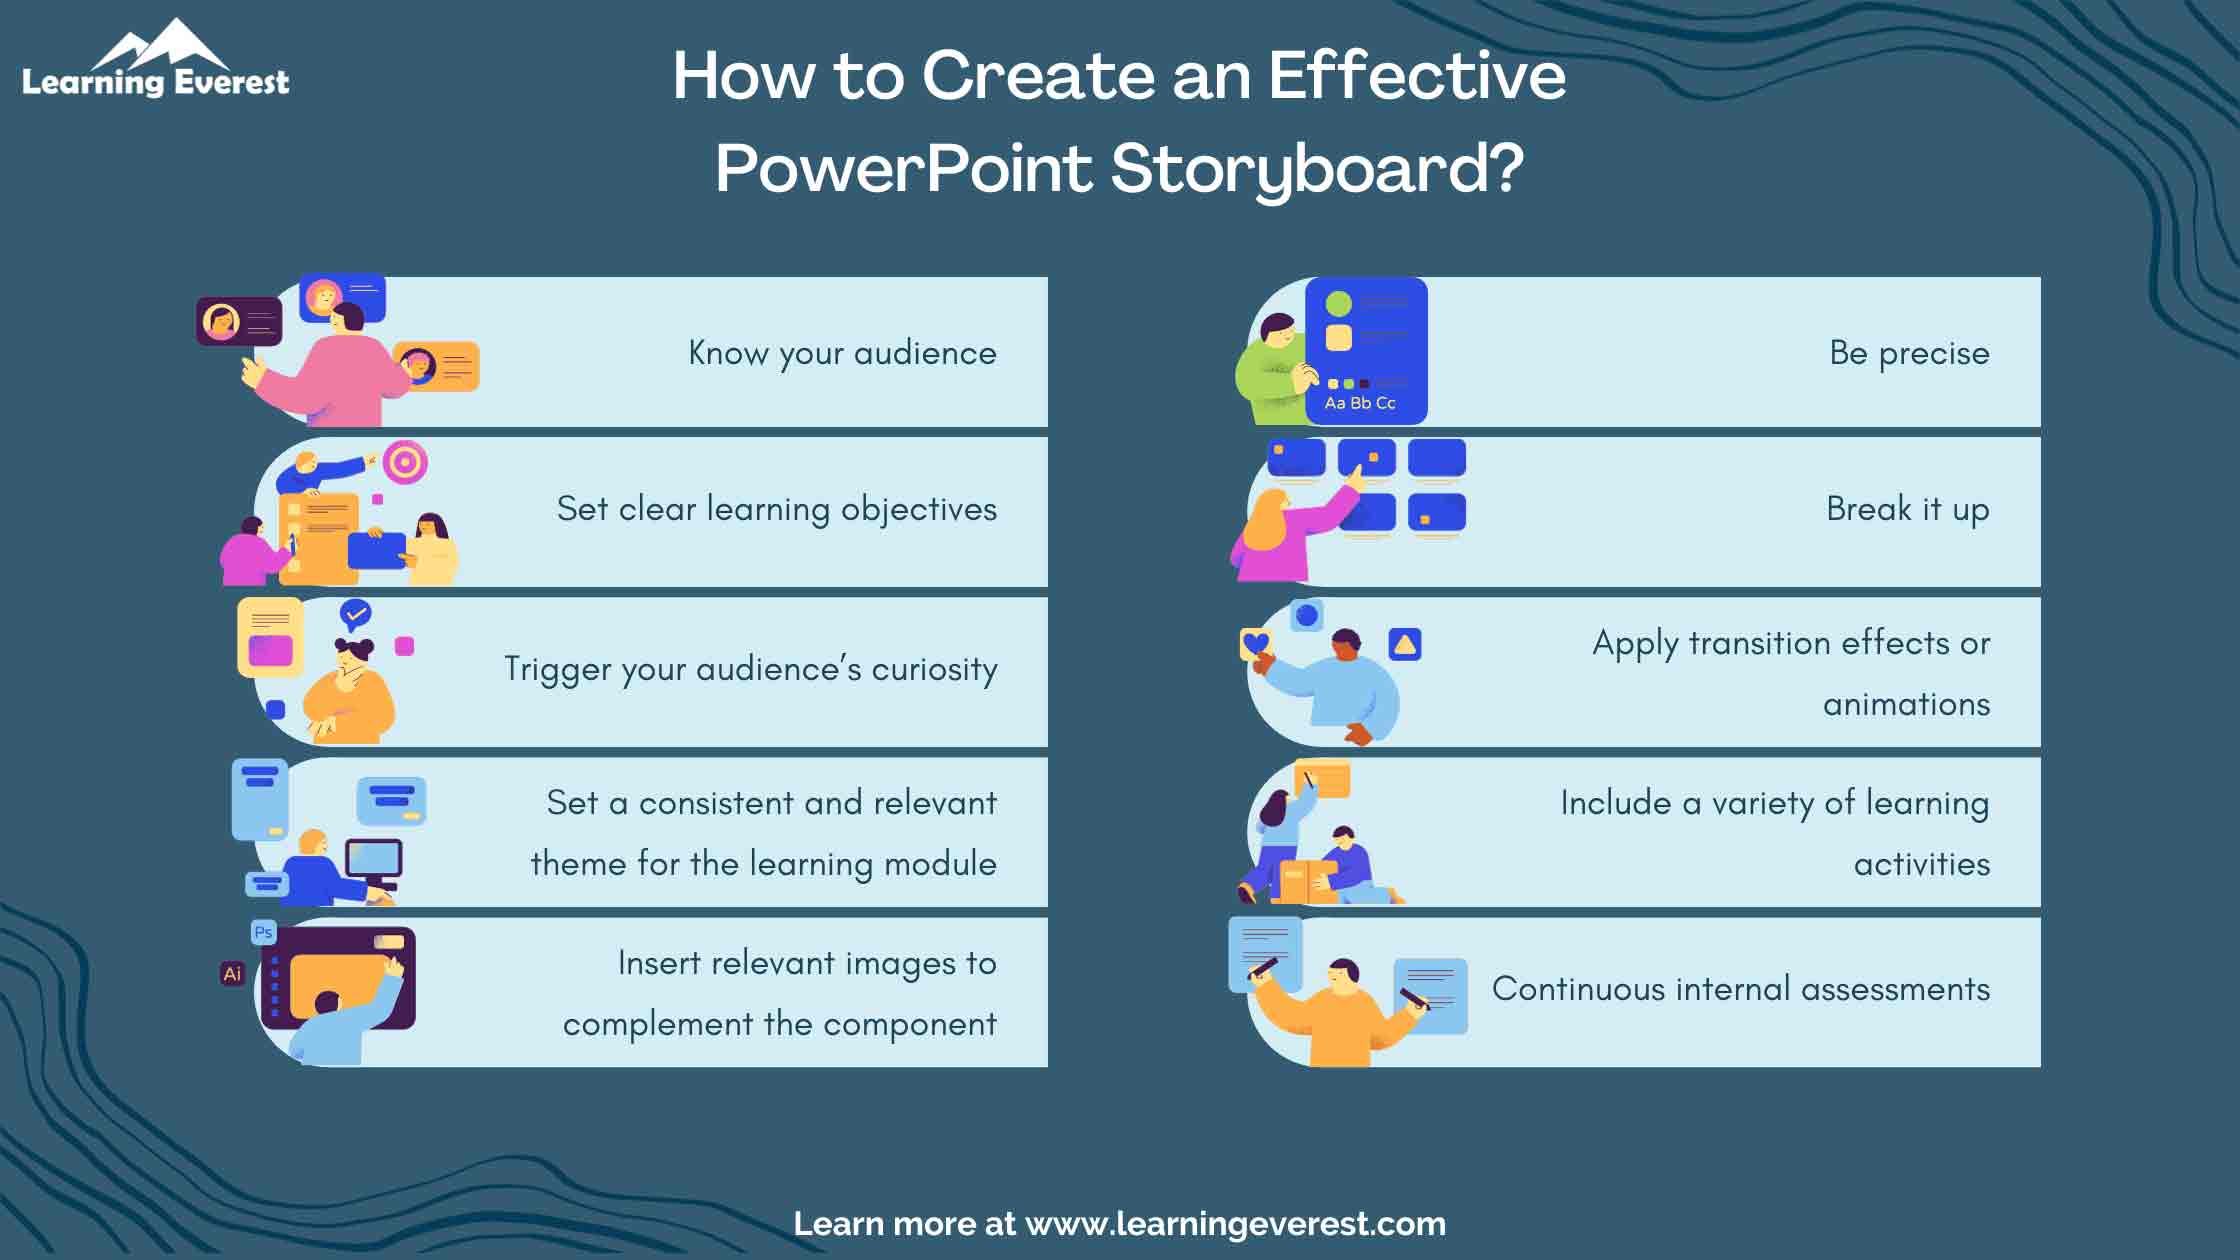 How to Create an Effective PowerPoint Storyboard